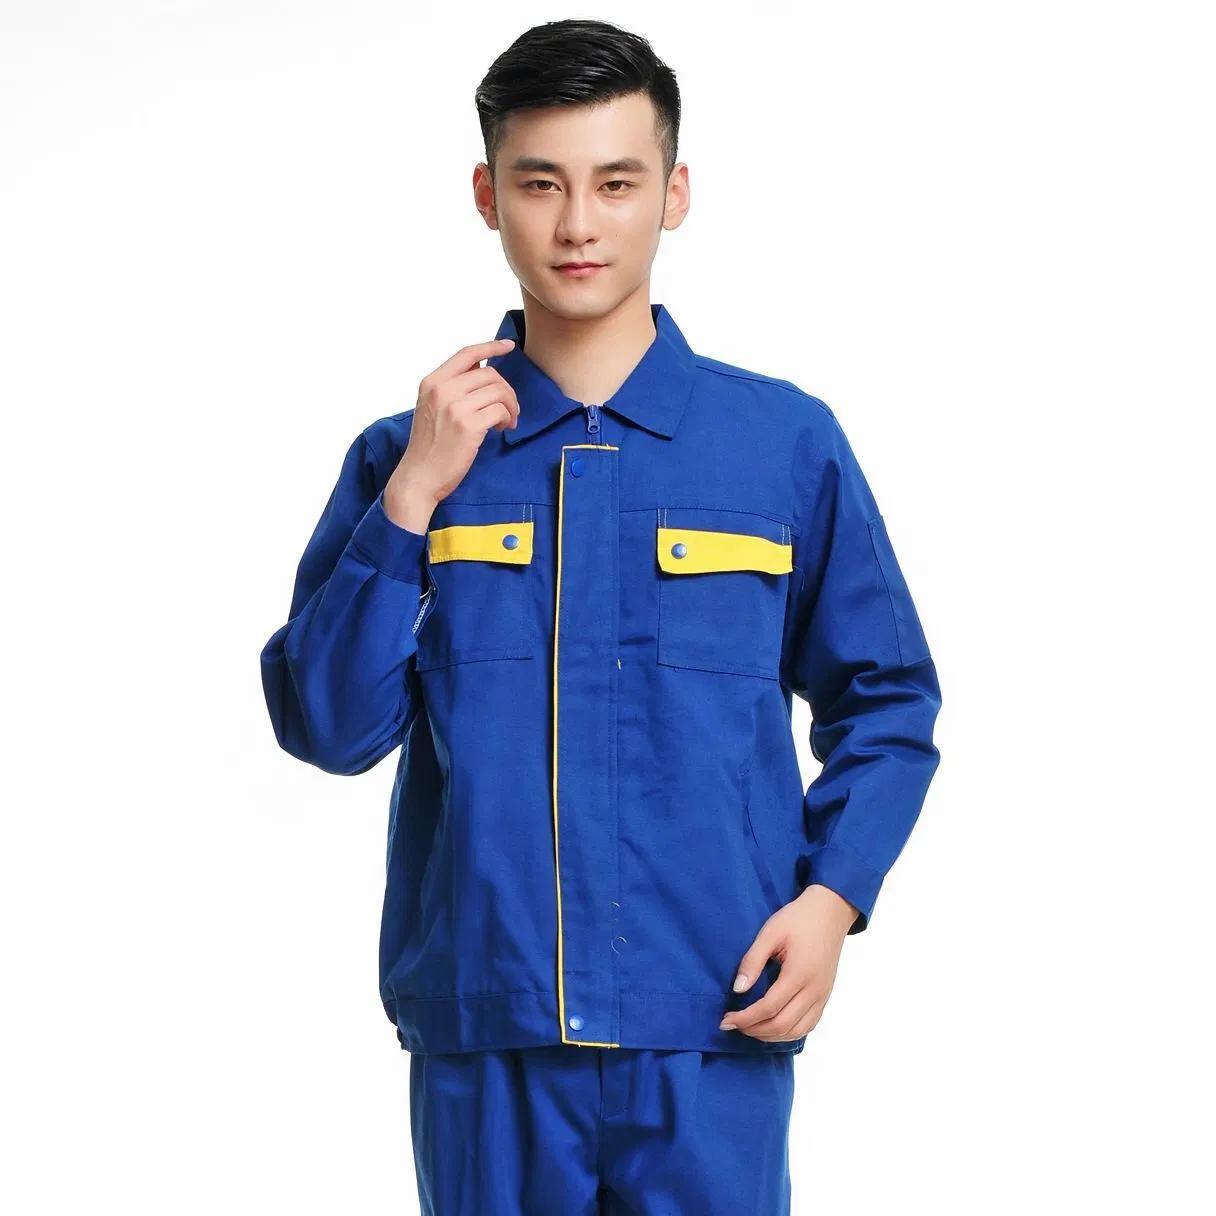 Clothing Clothes Mechanic Construction Security Work Wear Safety Uniforms Workwear